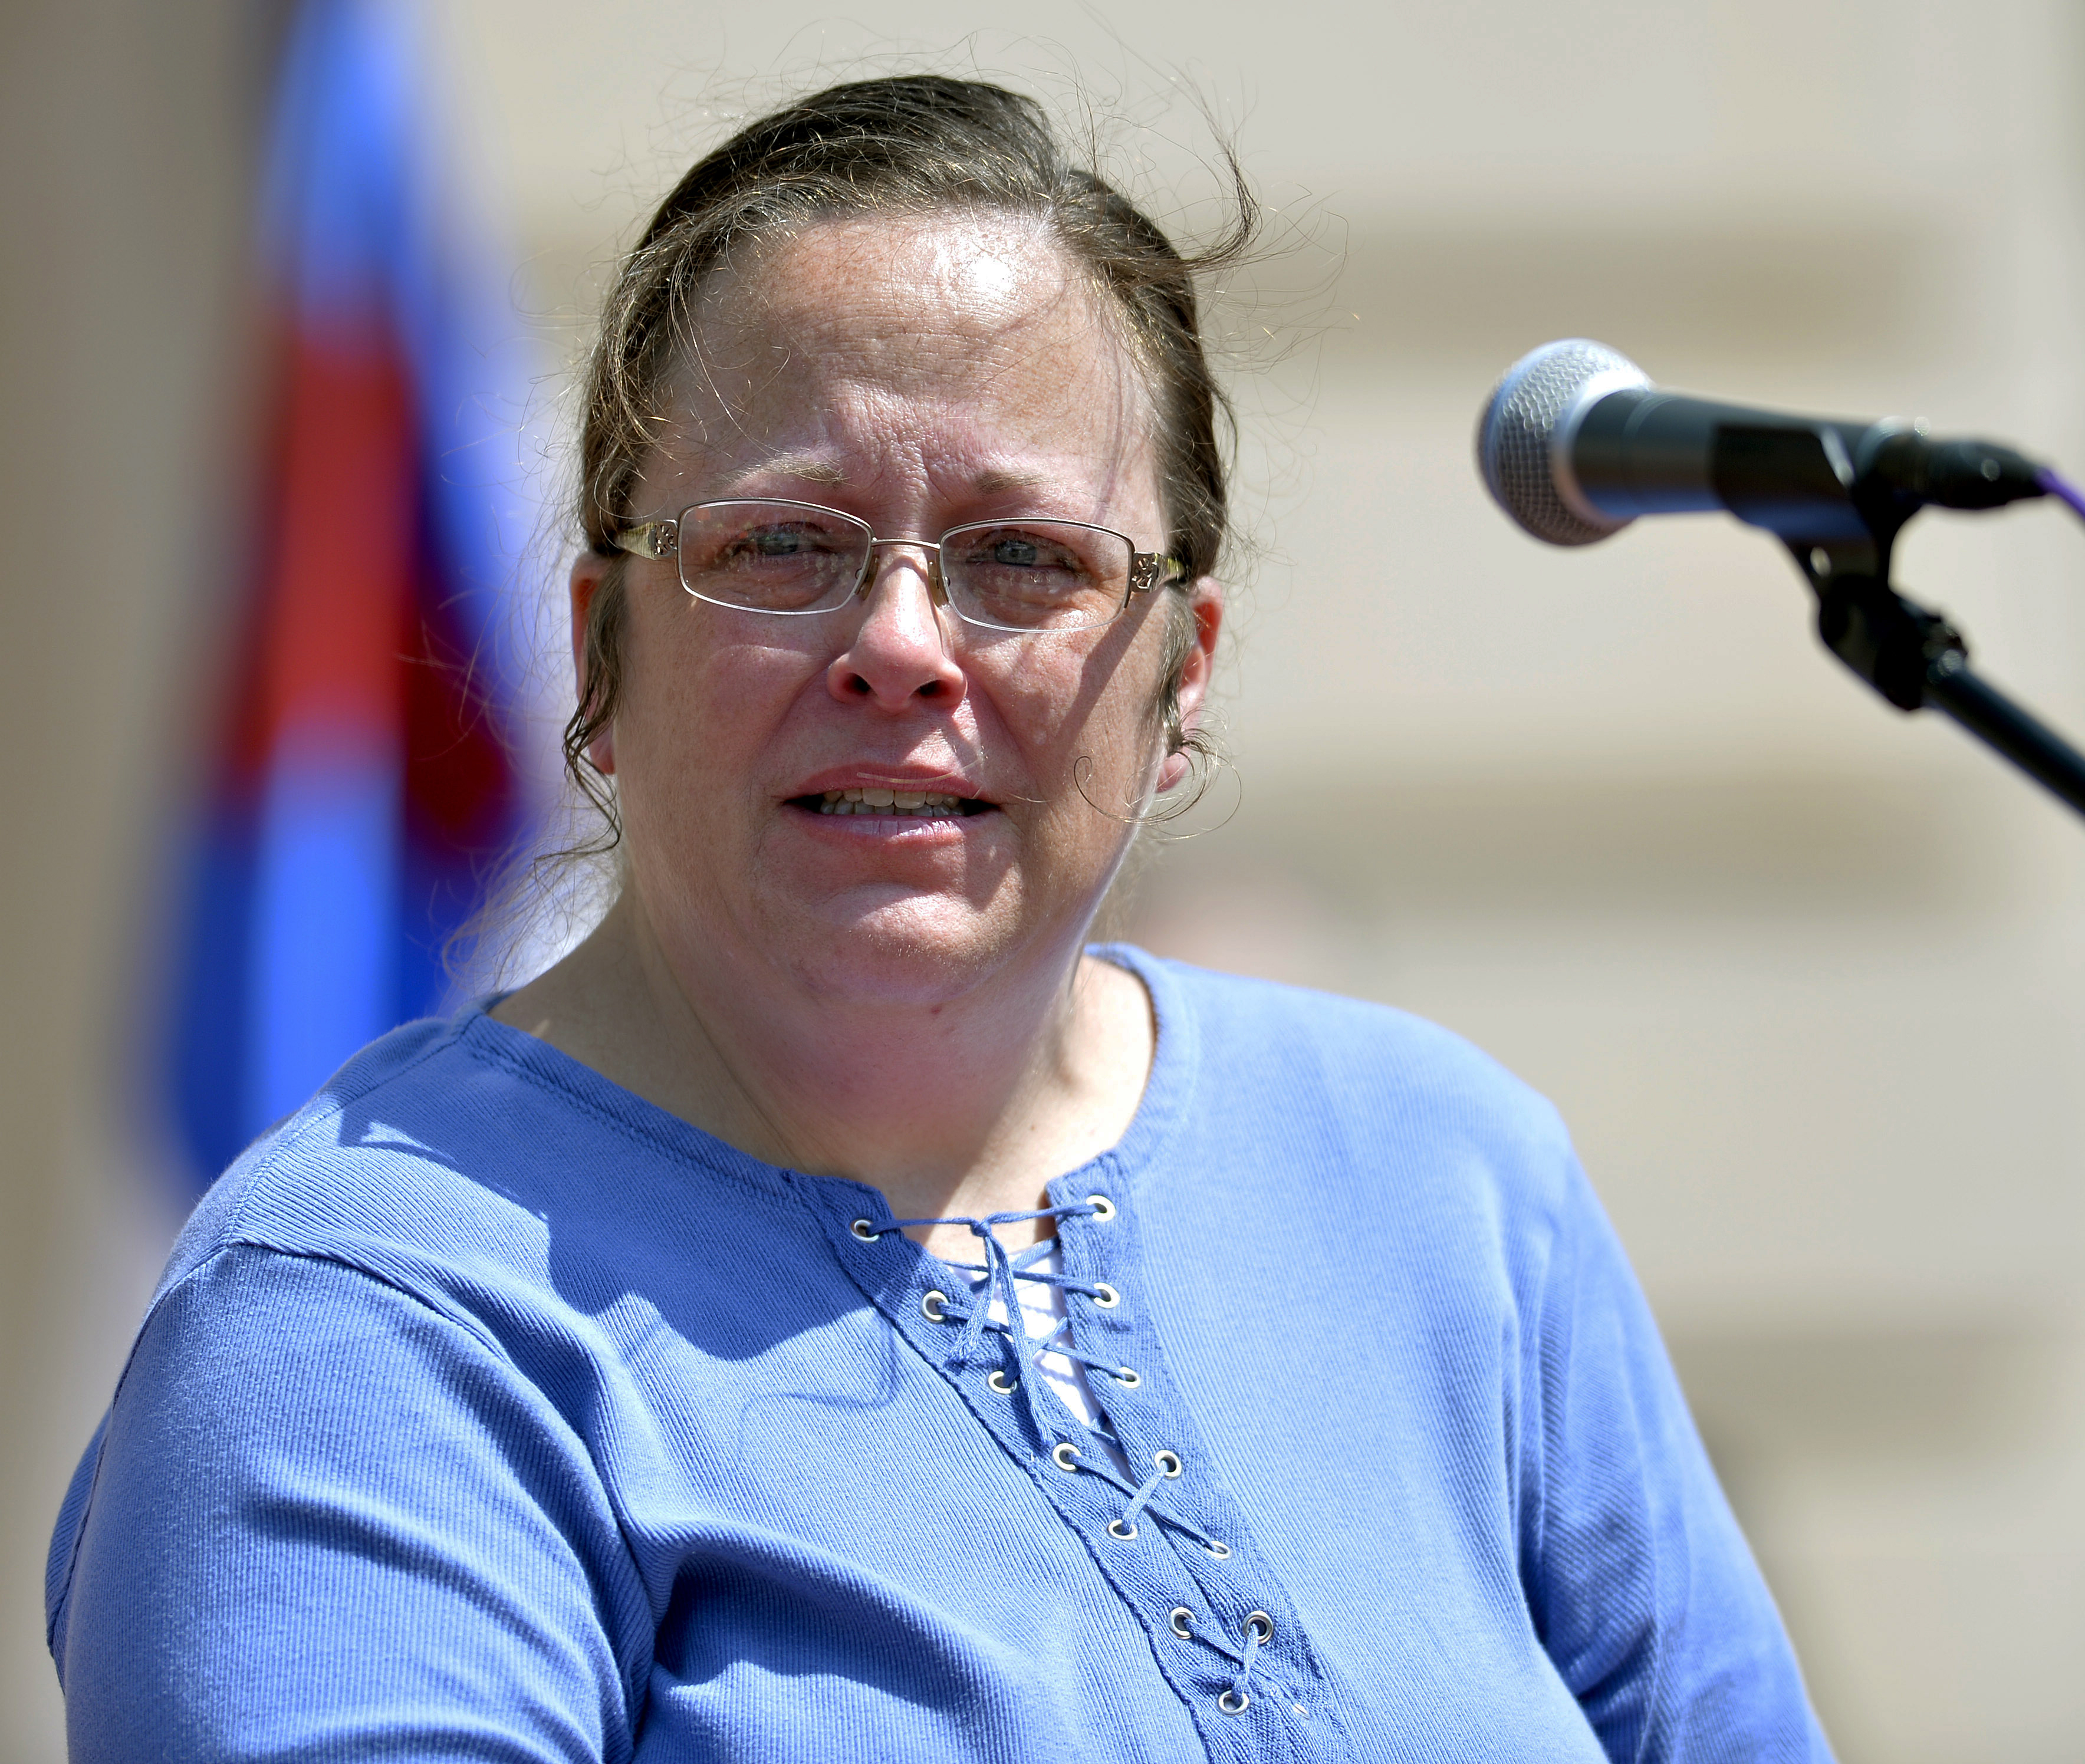 Rowan County Kentucky Clerk Kim Davis speaks to a gathering of supporters during a rally on the steps of the Kentucky State Capitol in Frankfort, Ky. on Aug. 22, 2015. (Timothy D. Easley—AP)